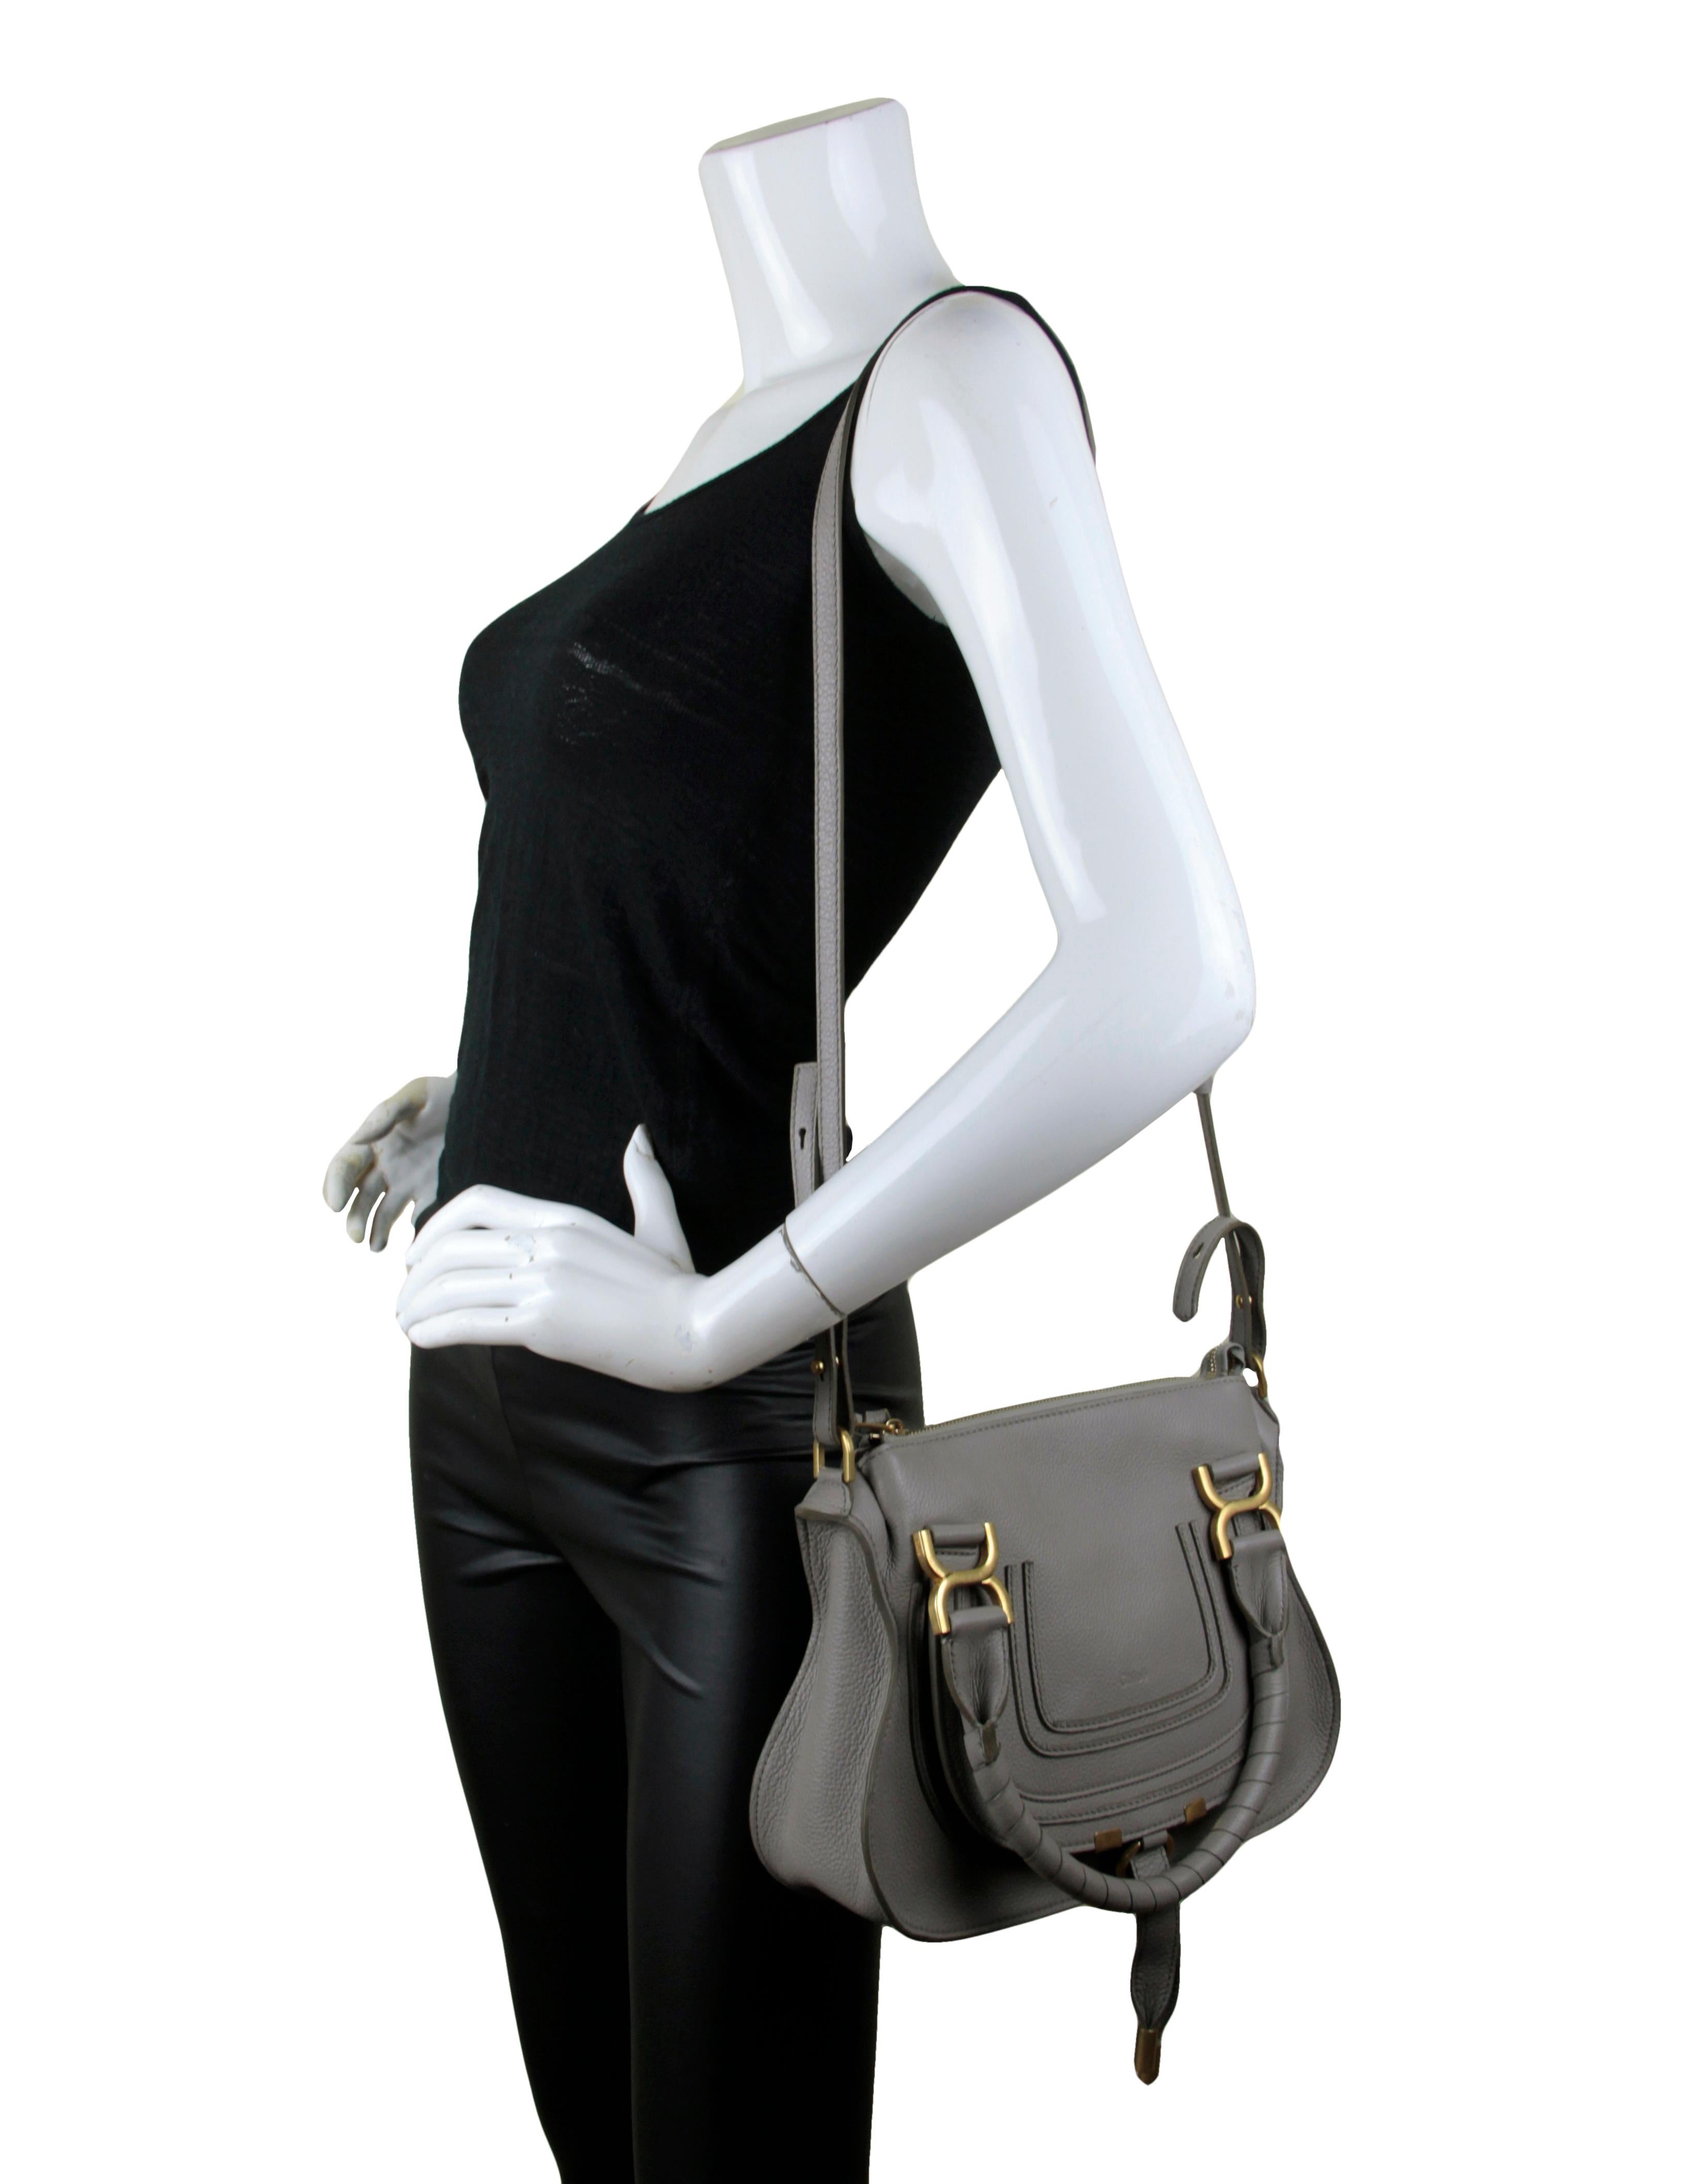 Chloe Cashmere Grey Leather Small Marcie Bag

Made In: Italy
Color: Grey
Hardware: Goldtone
Materials: Grained calfskin leather
Lining: Cotton lining
Closure/Opening: Zip top
Exterior Pockets: Front slit pocket under flap
Interior Pockets: One zip